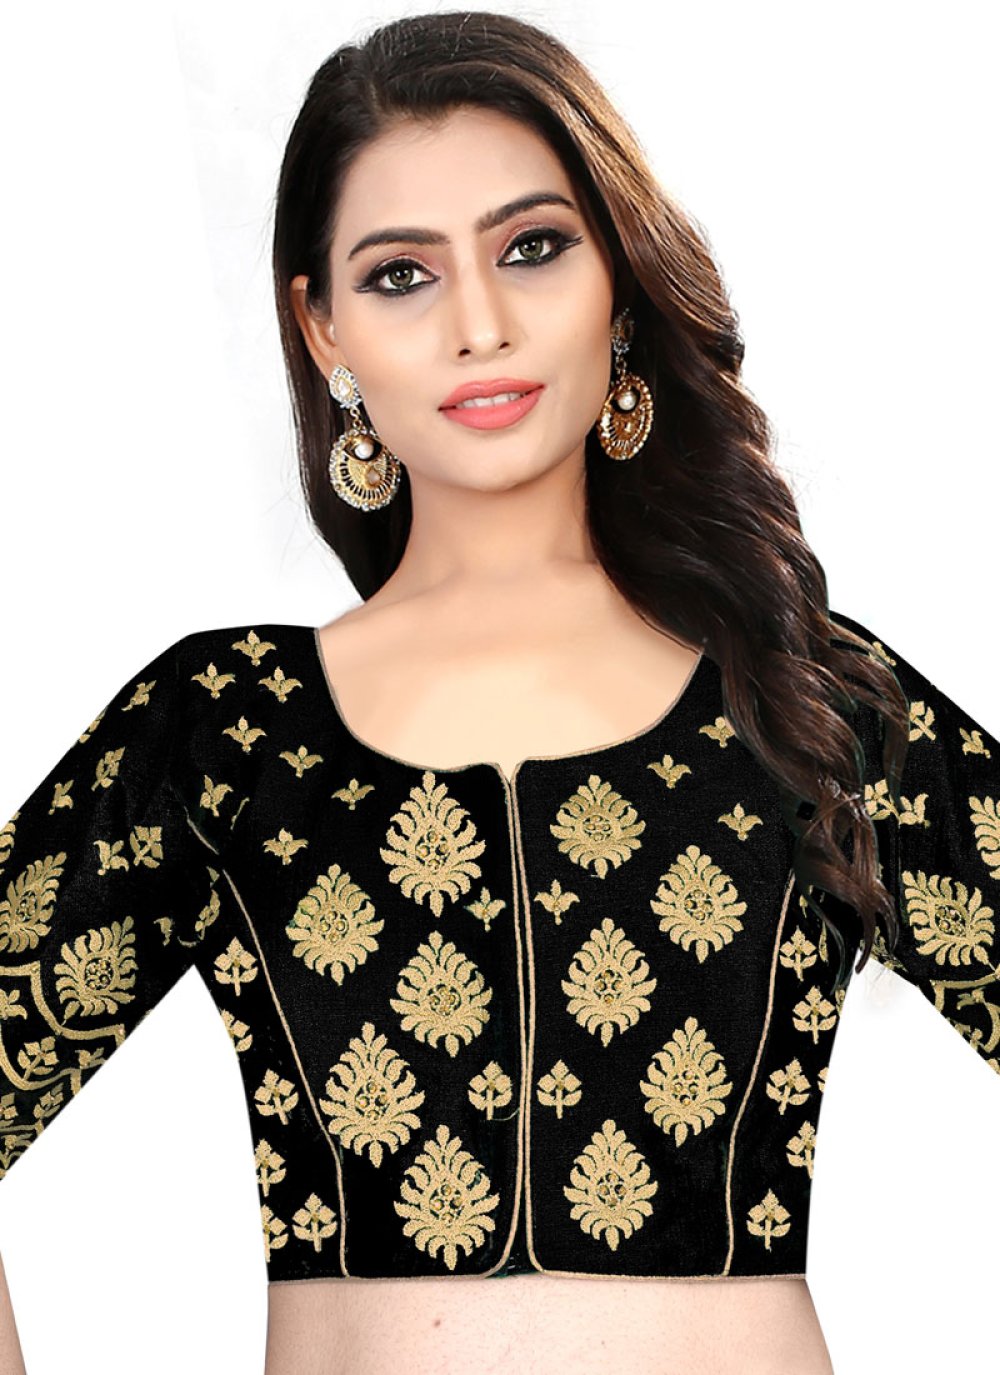 Incredible Collection of Over 999 Shoulder Cut Blouse Designs in Full 4K